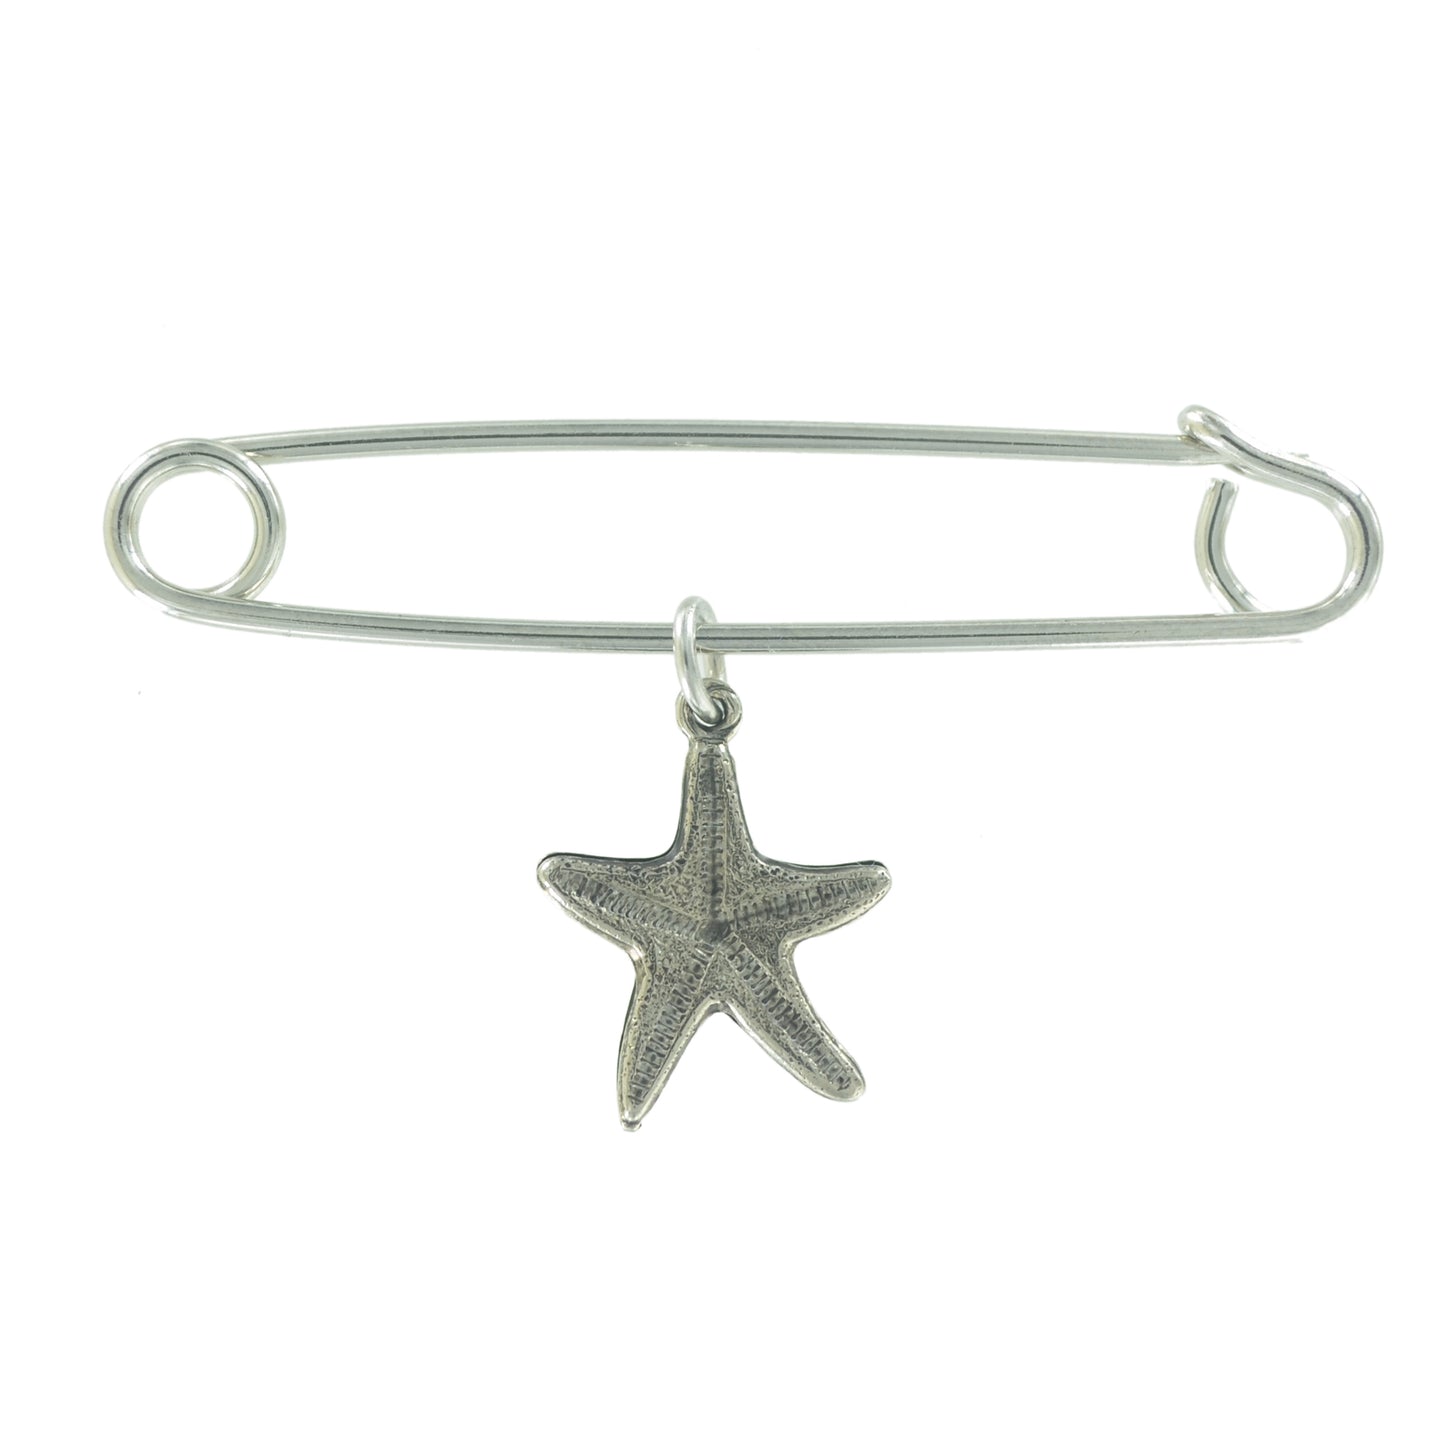 Ky & Co USA Safety Pin Brooch Small Ocean Starfish Charm Silver Tone 2"